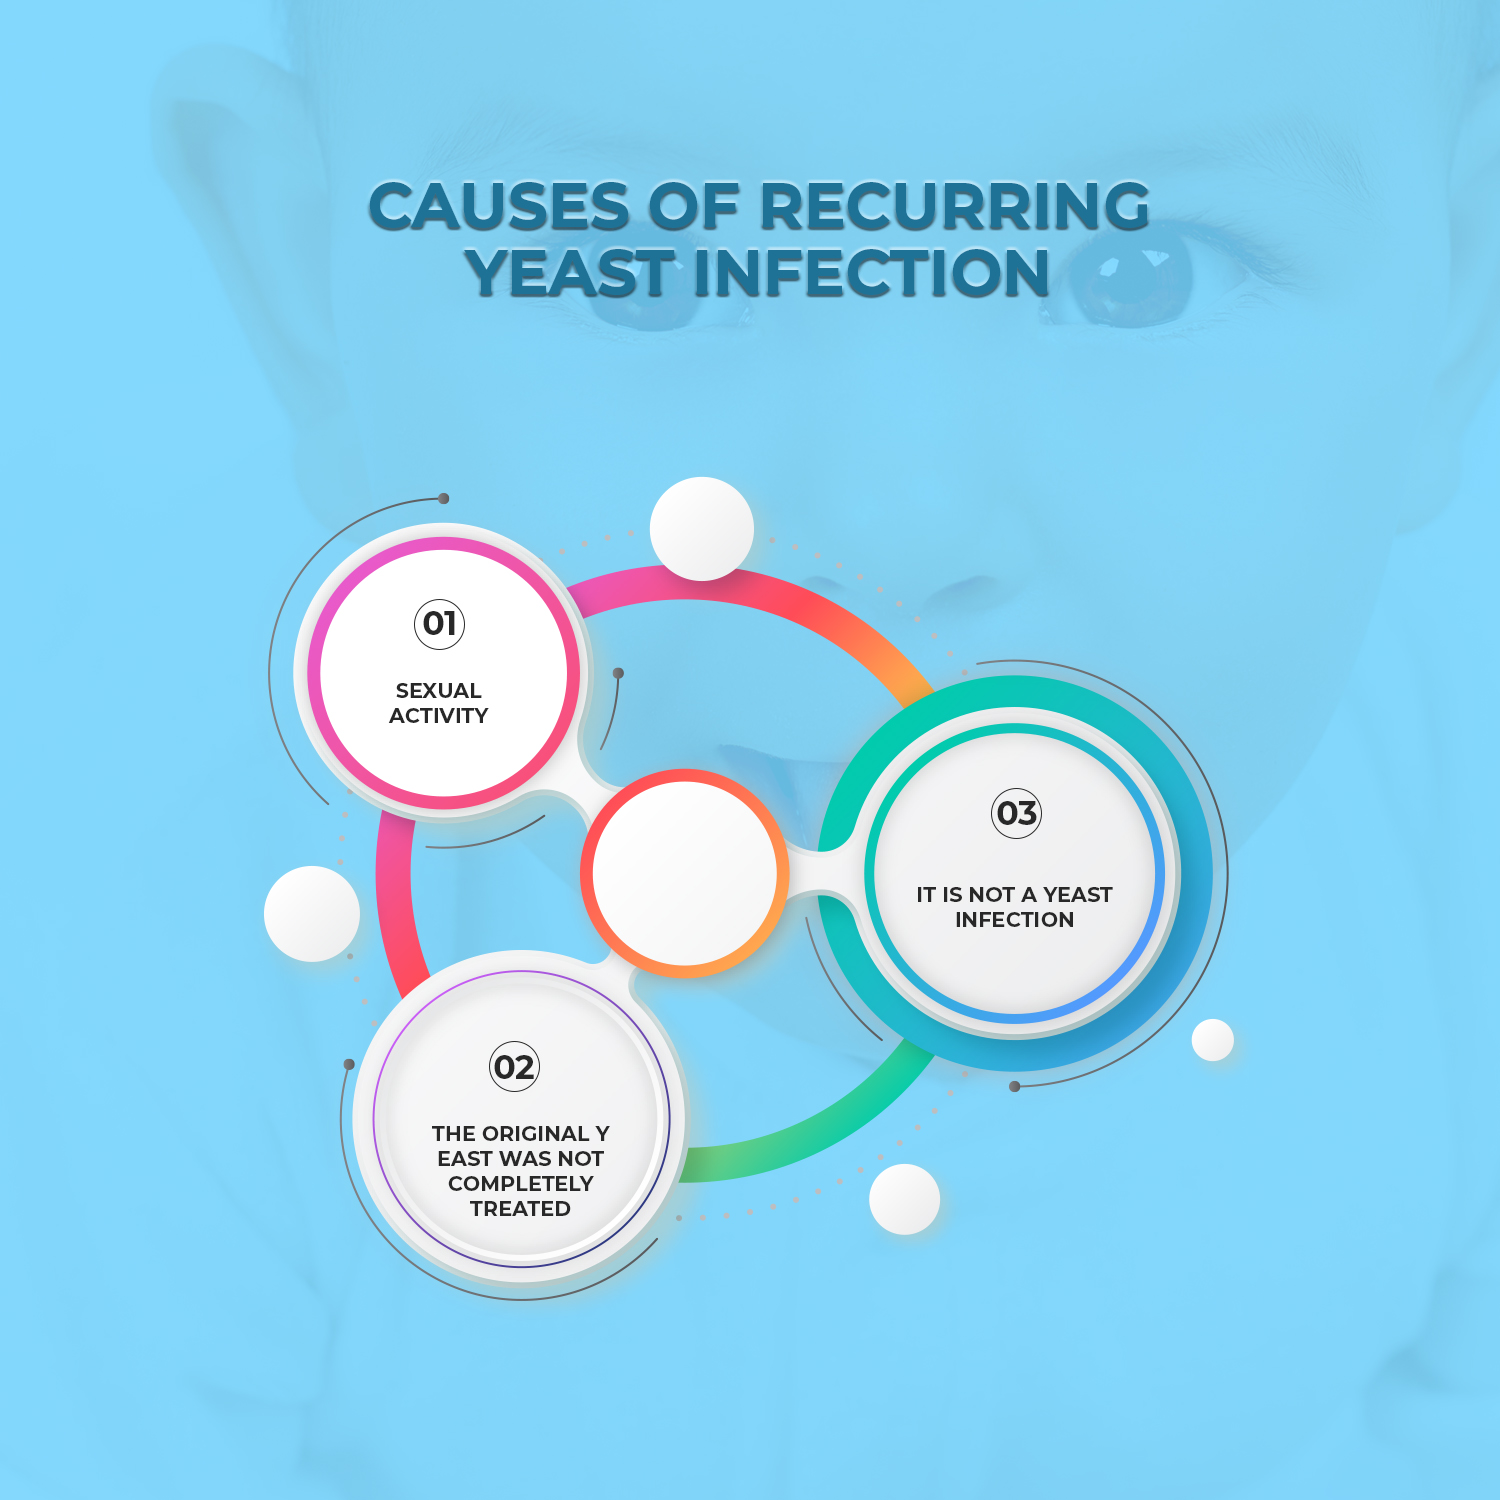 Causes of Recurring Yeast Infection